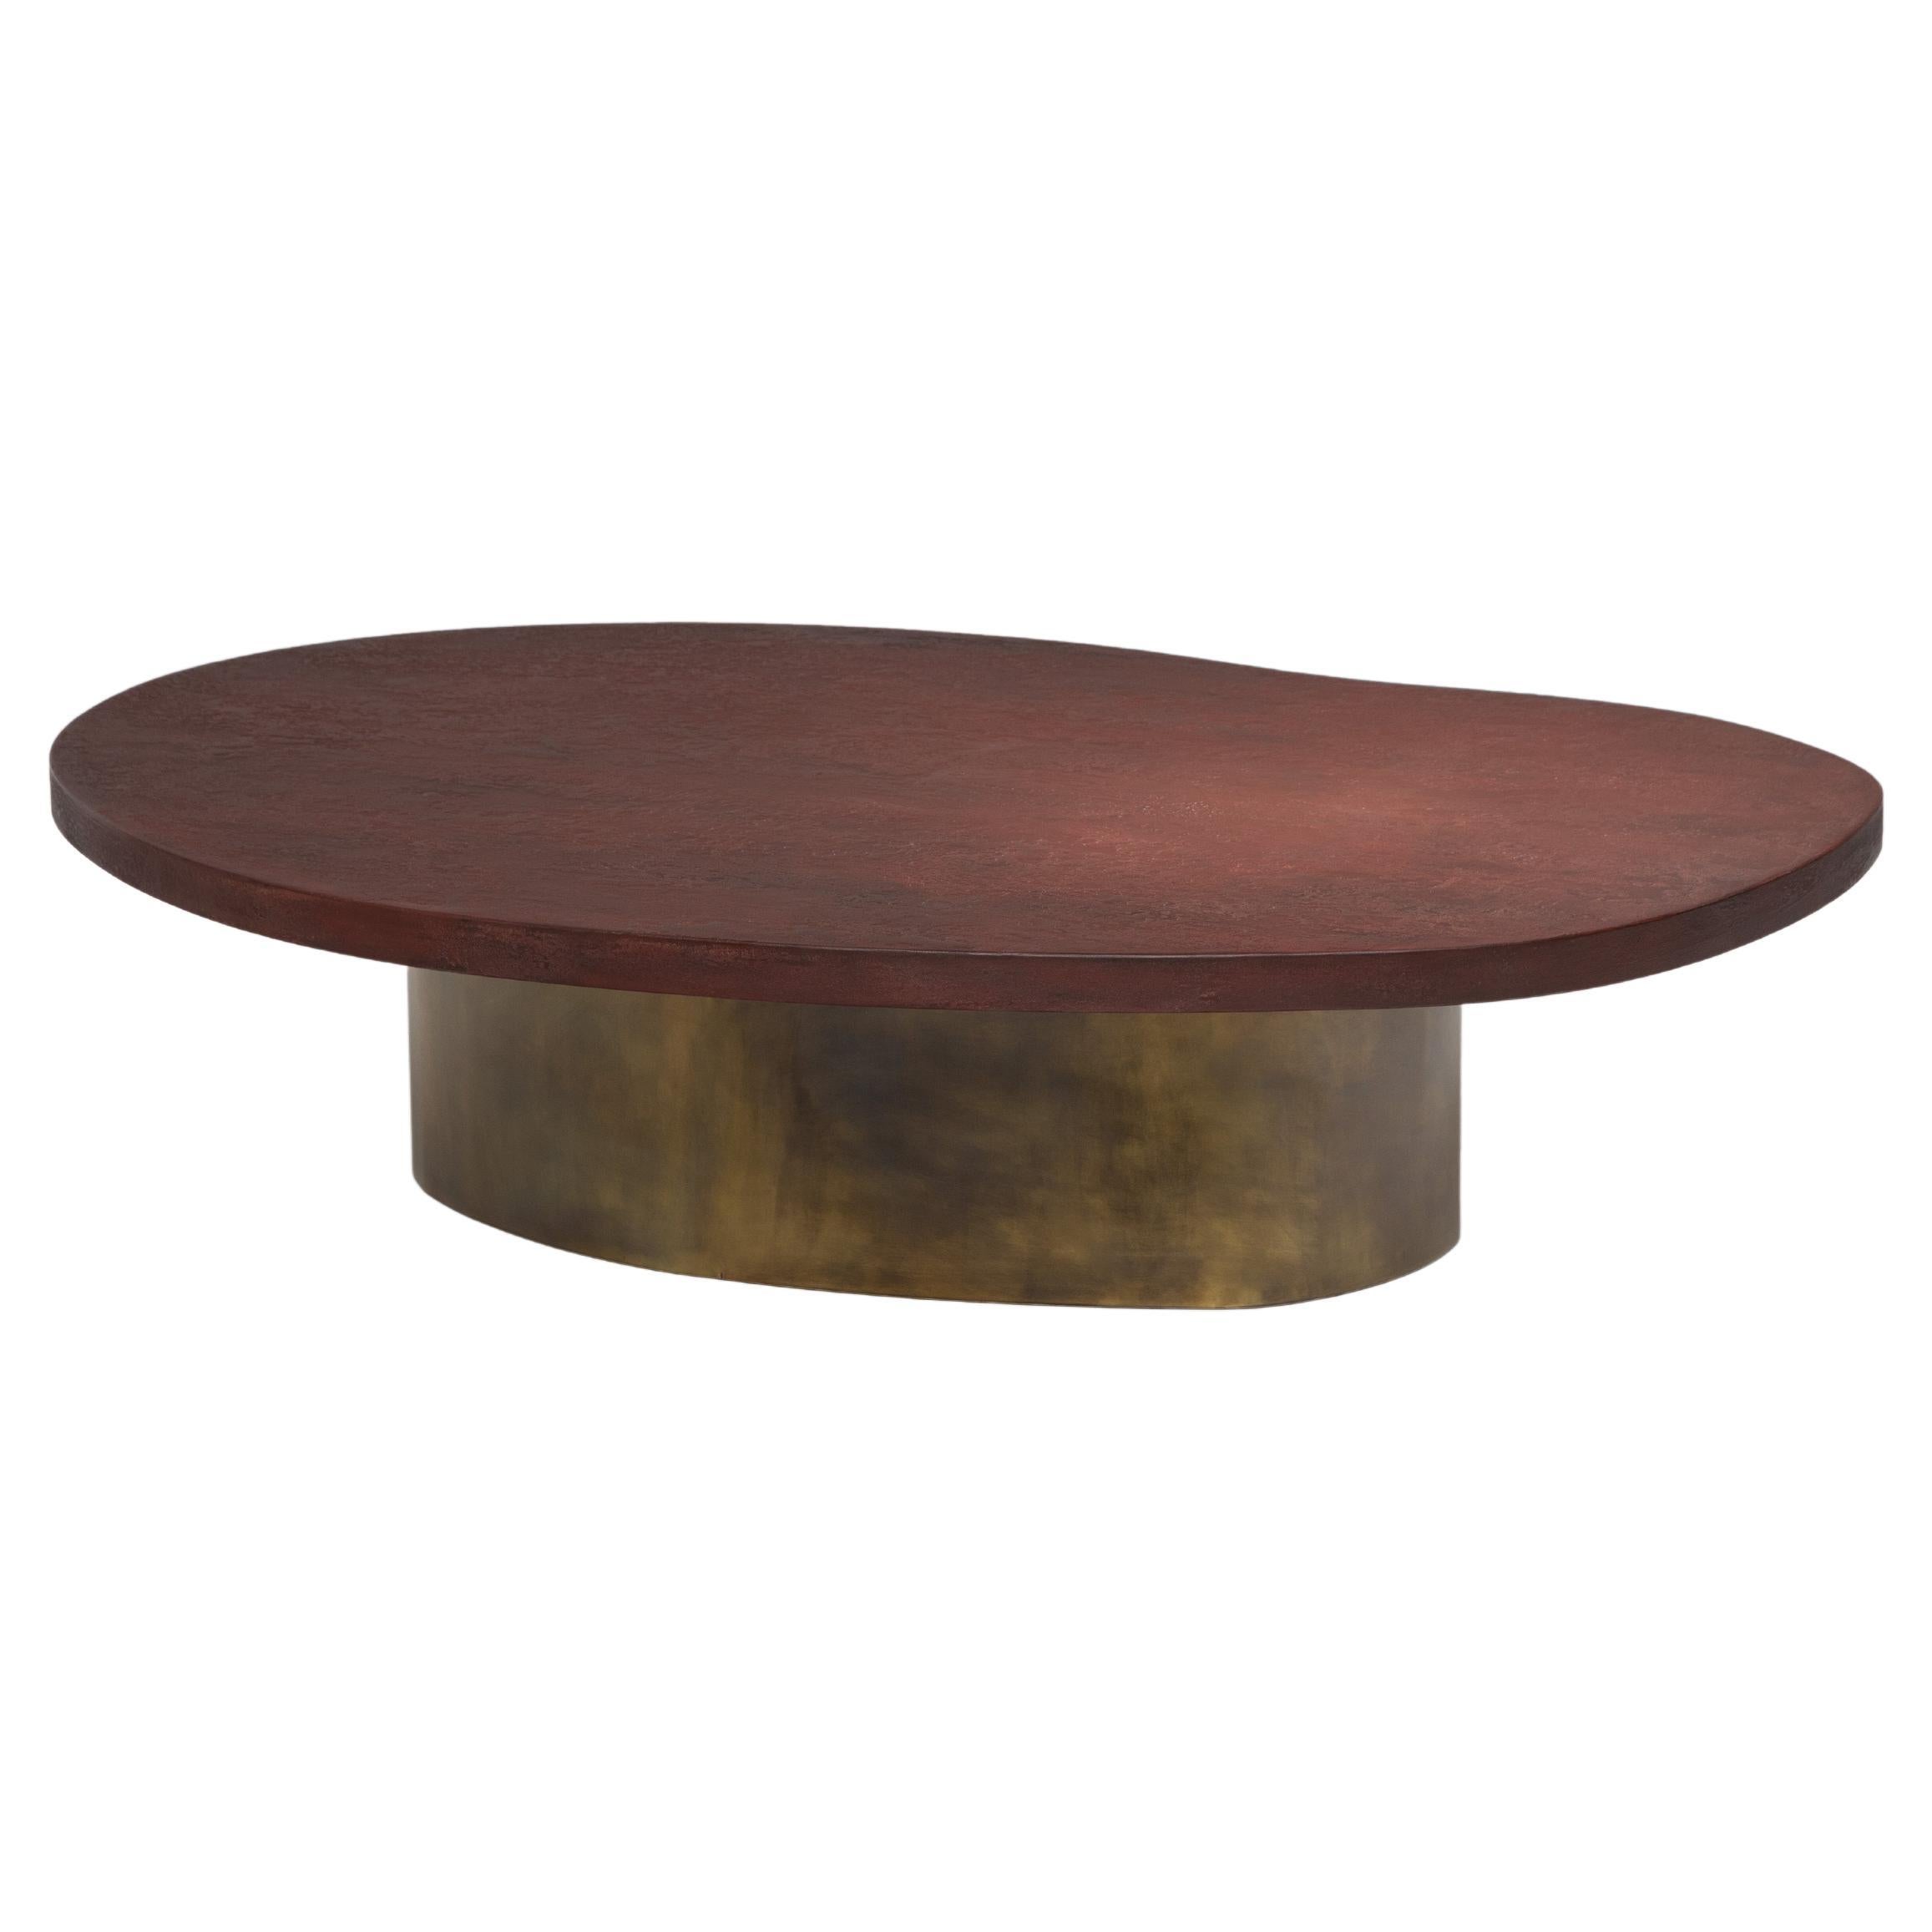 Pierre Bonnefille Table Basse Stone Cuprite Matte - mixed media coffee table For Sale